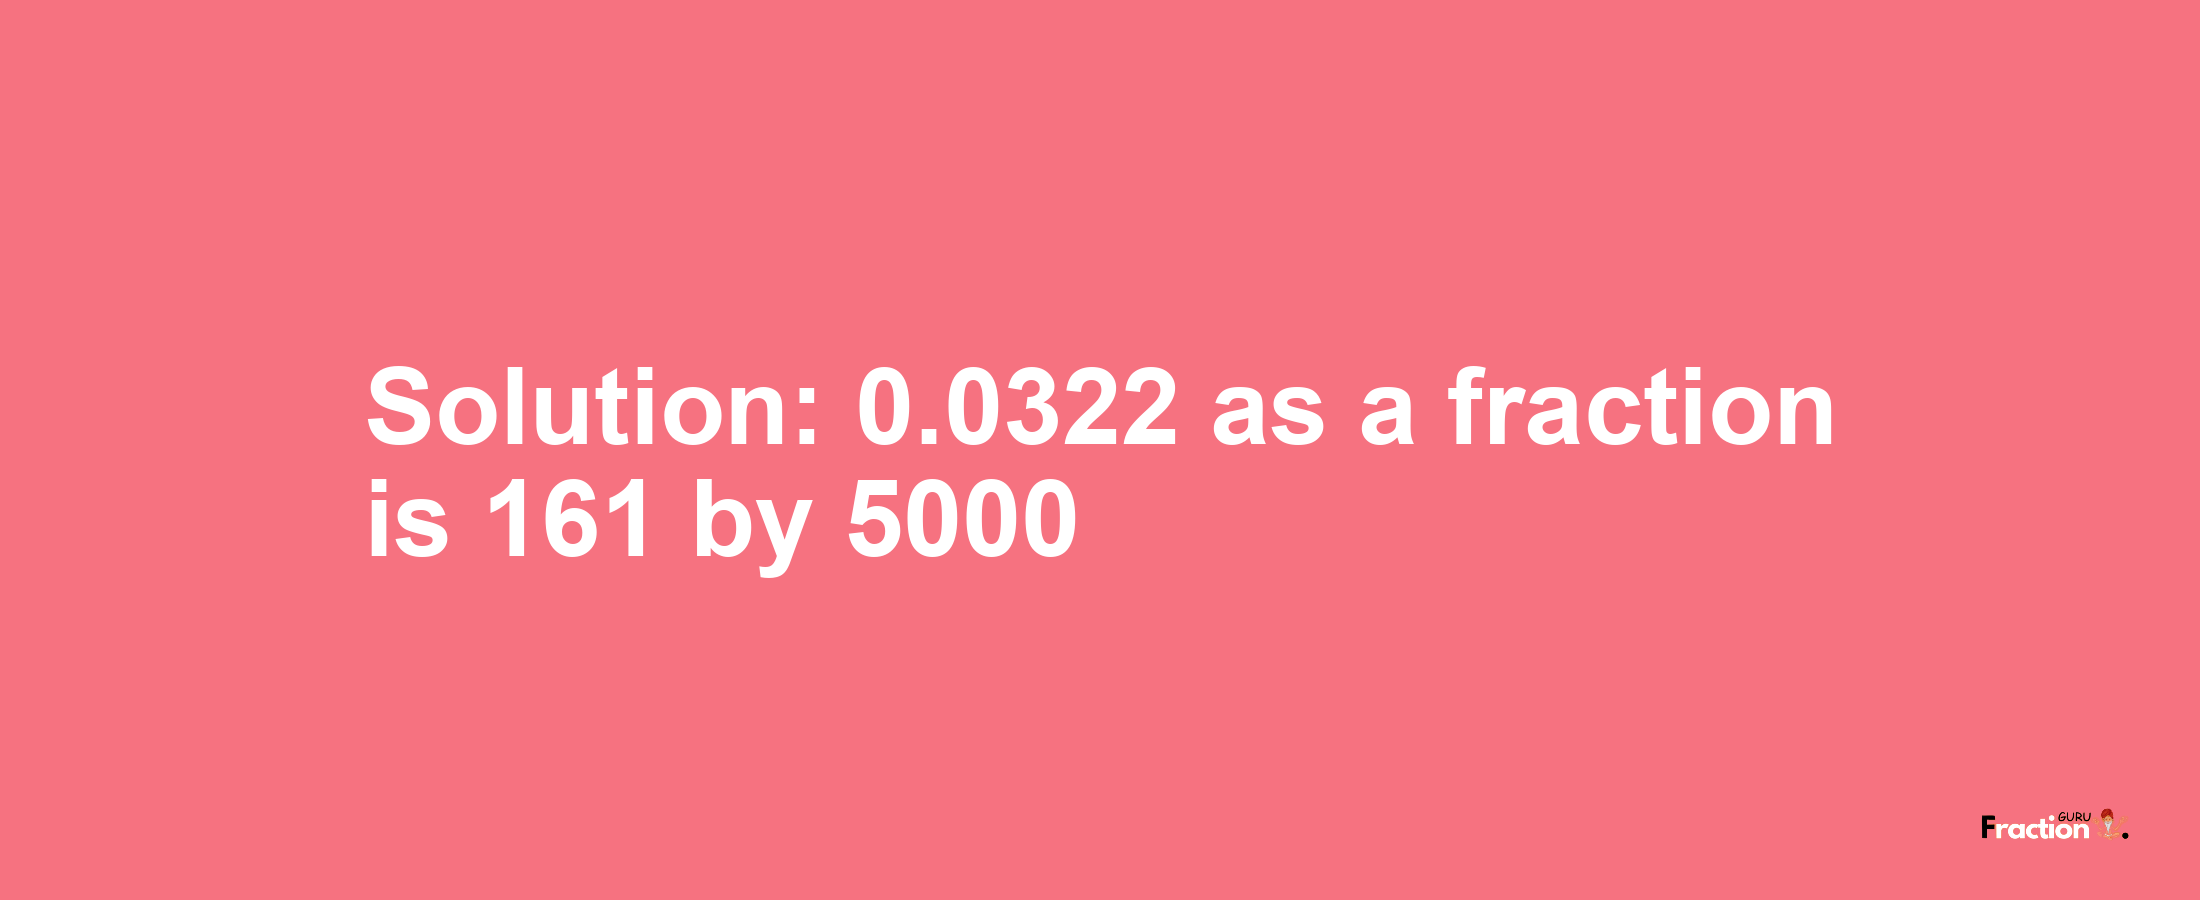 Solution:0.0322 as a fraction is 161/5000